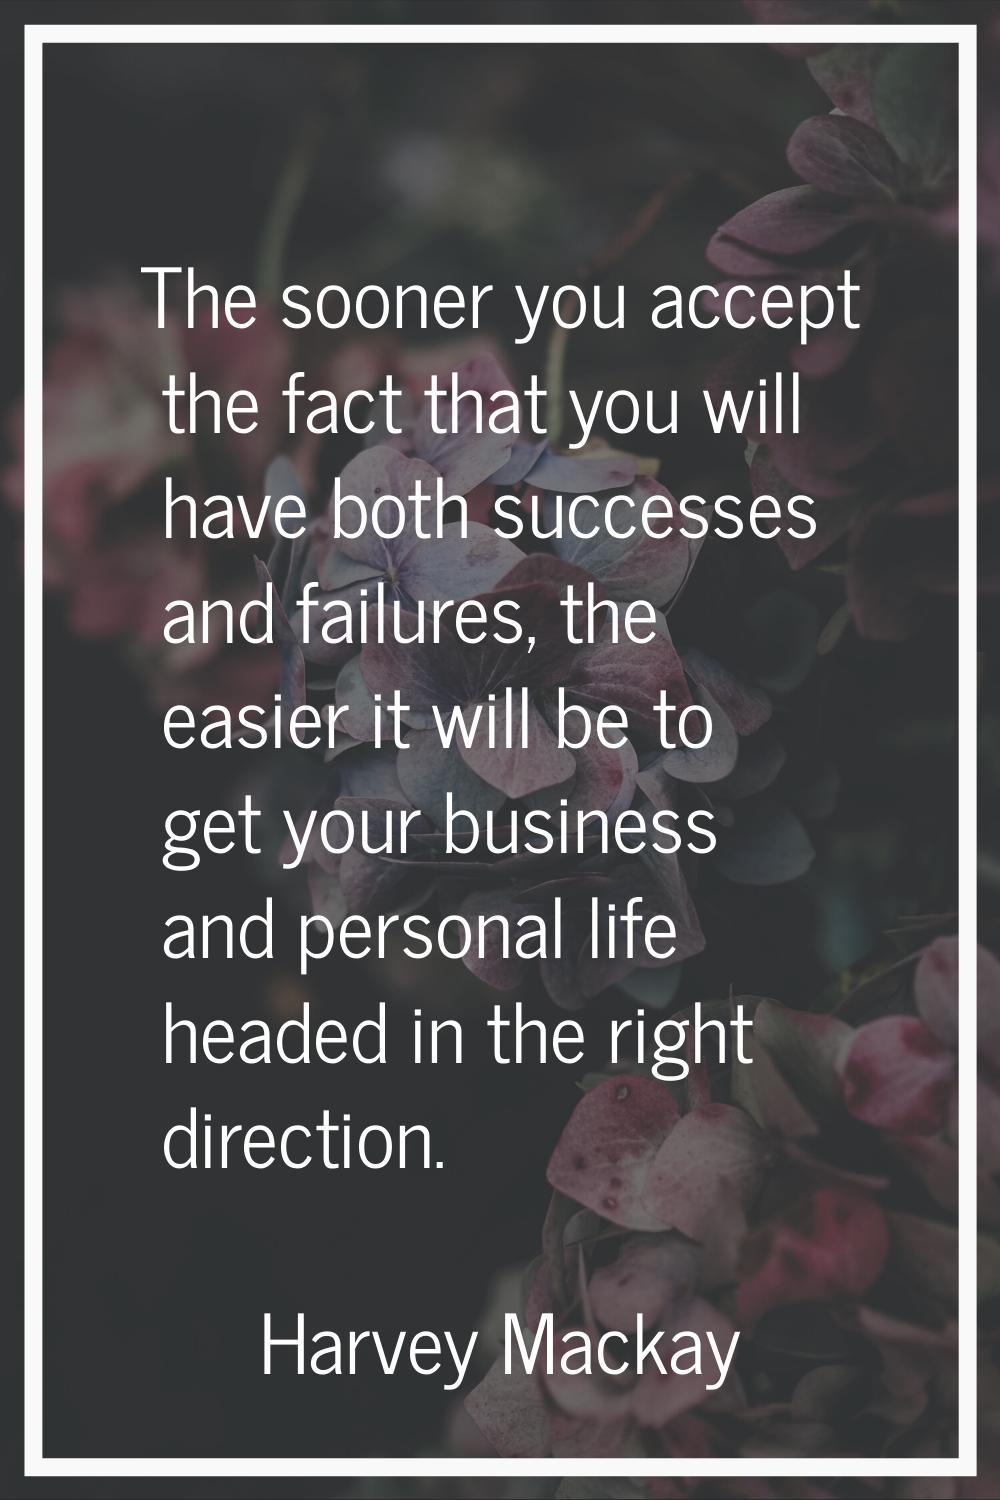 The sooner you accept the fact that you will have both successes and failures, the easier it will b